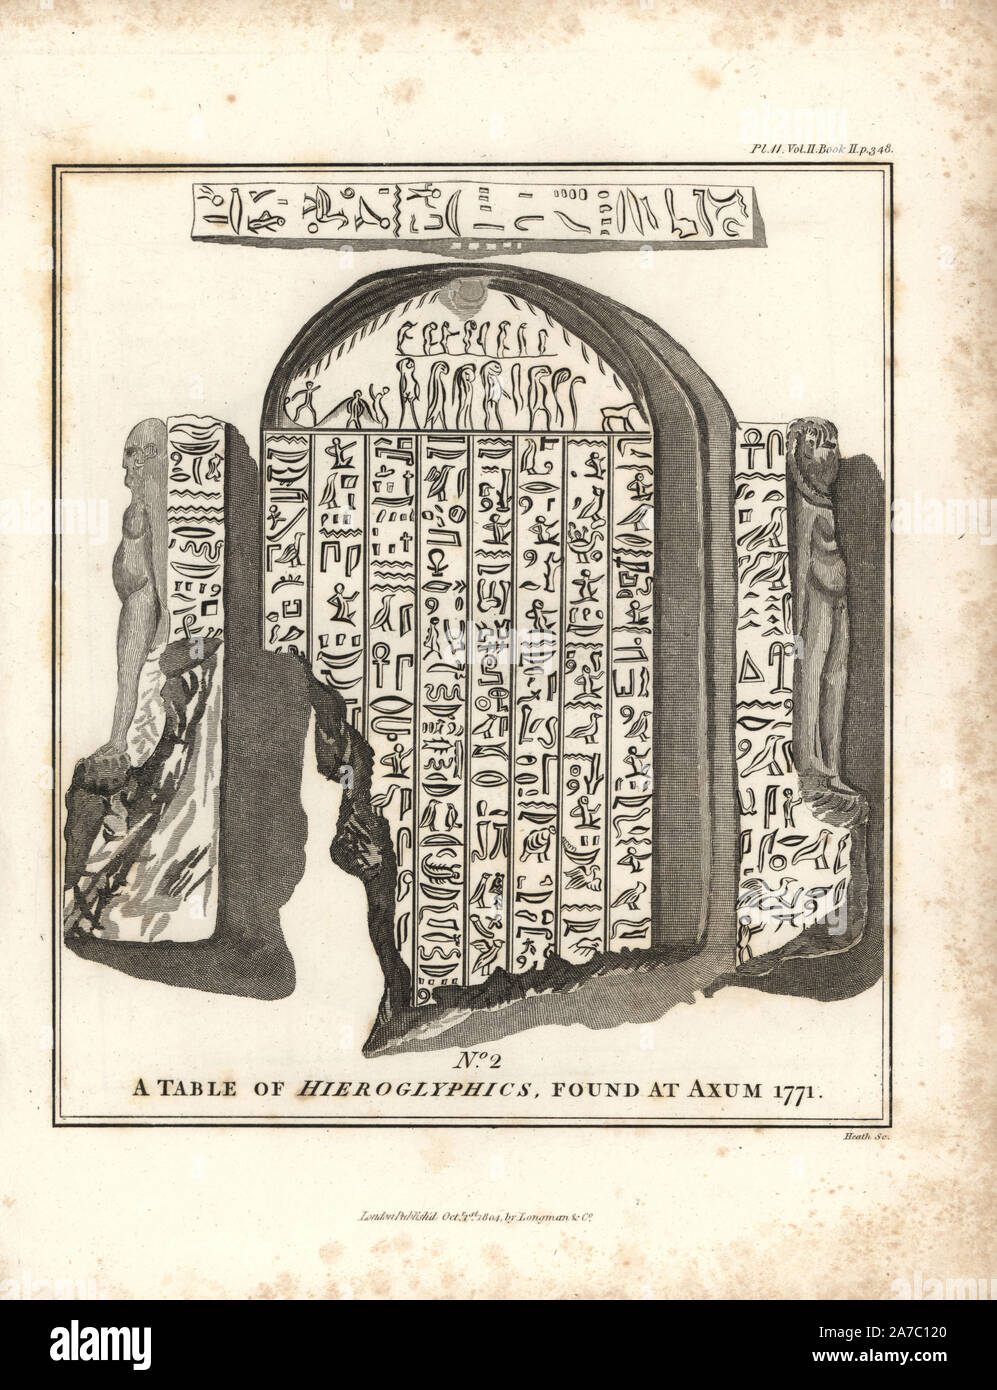 Table of hieroglyphics found at Axum. Copperplate engraving from James Bruce's 'Travels to Discover the Source of the Nile, in the years 1768, 1769, 1770, 1771, 1772 and 1773,' London, 1790. James Bruce (1730-1794) was a Scottish explorer and travel writer who spent more than 12 years in North Africa and Ethiopia. Engraved by Heath after an original drawing by Bruce. Stock Photo